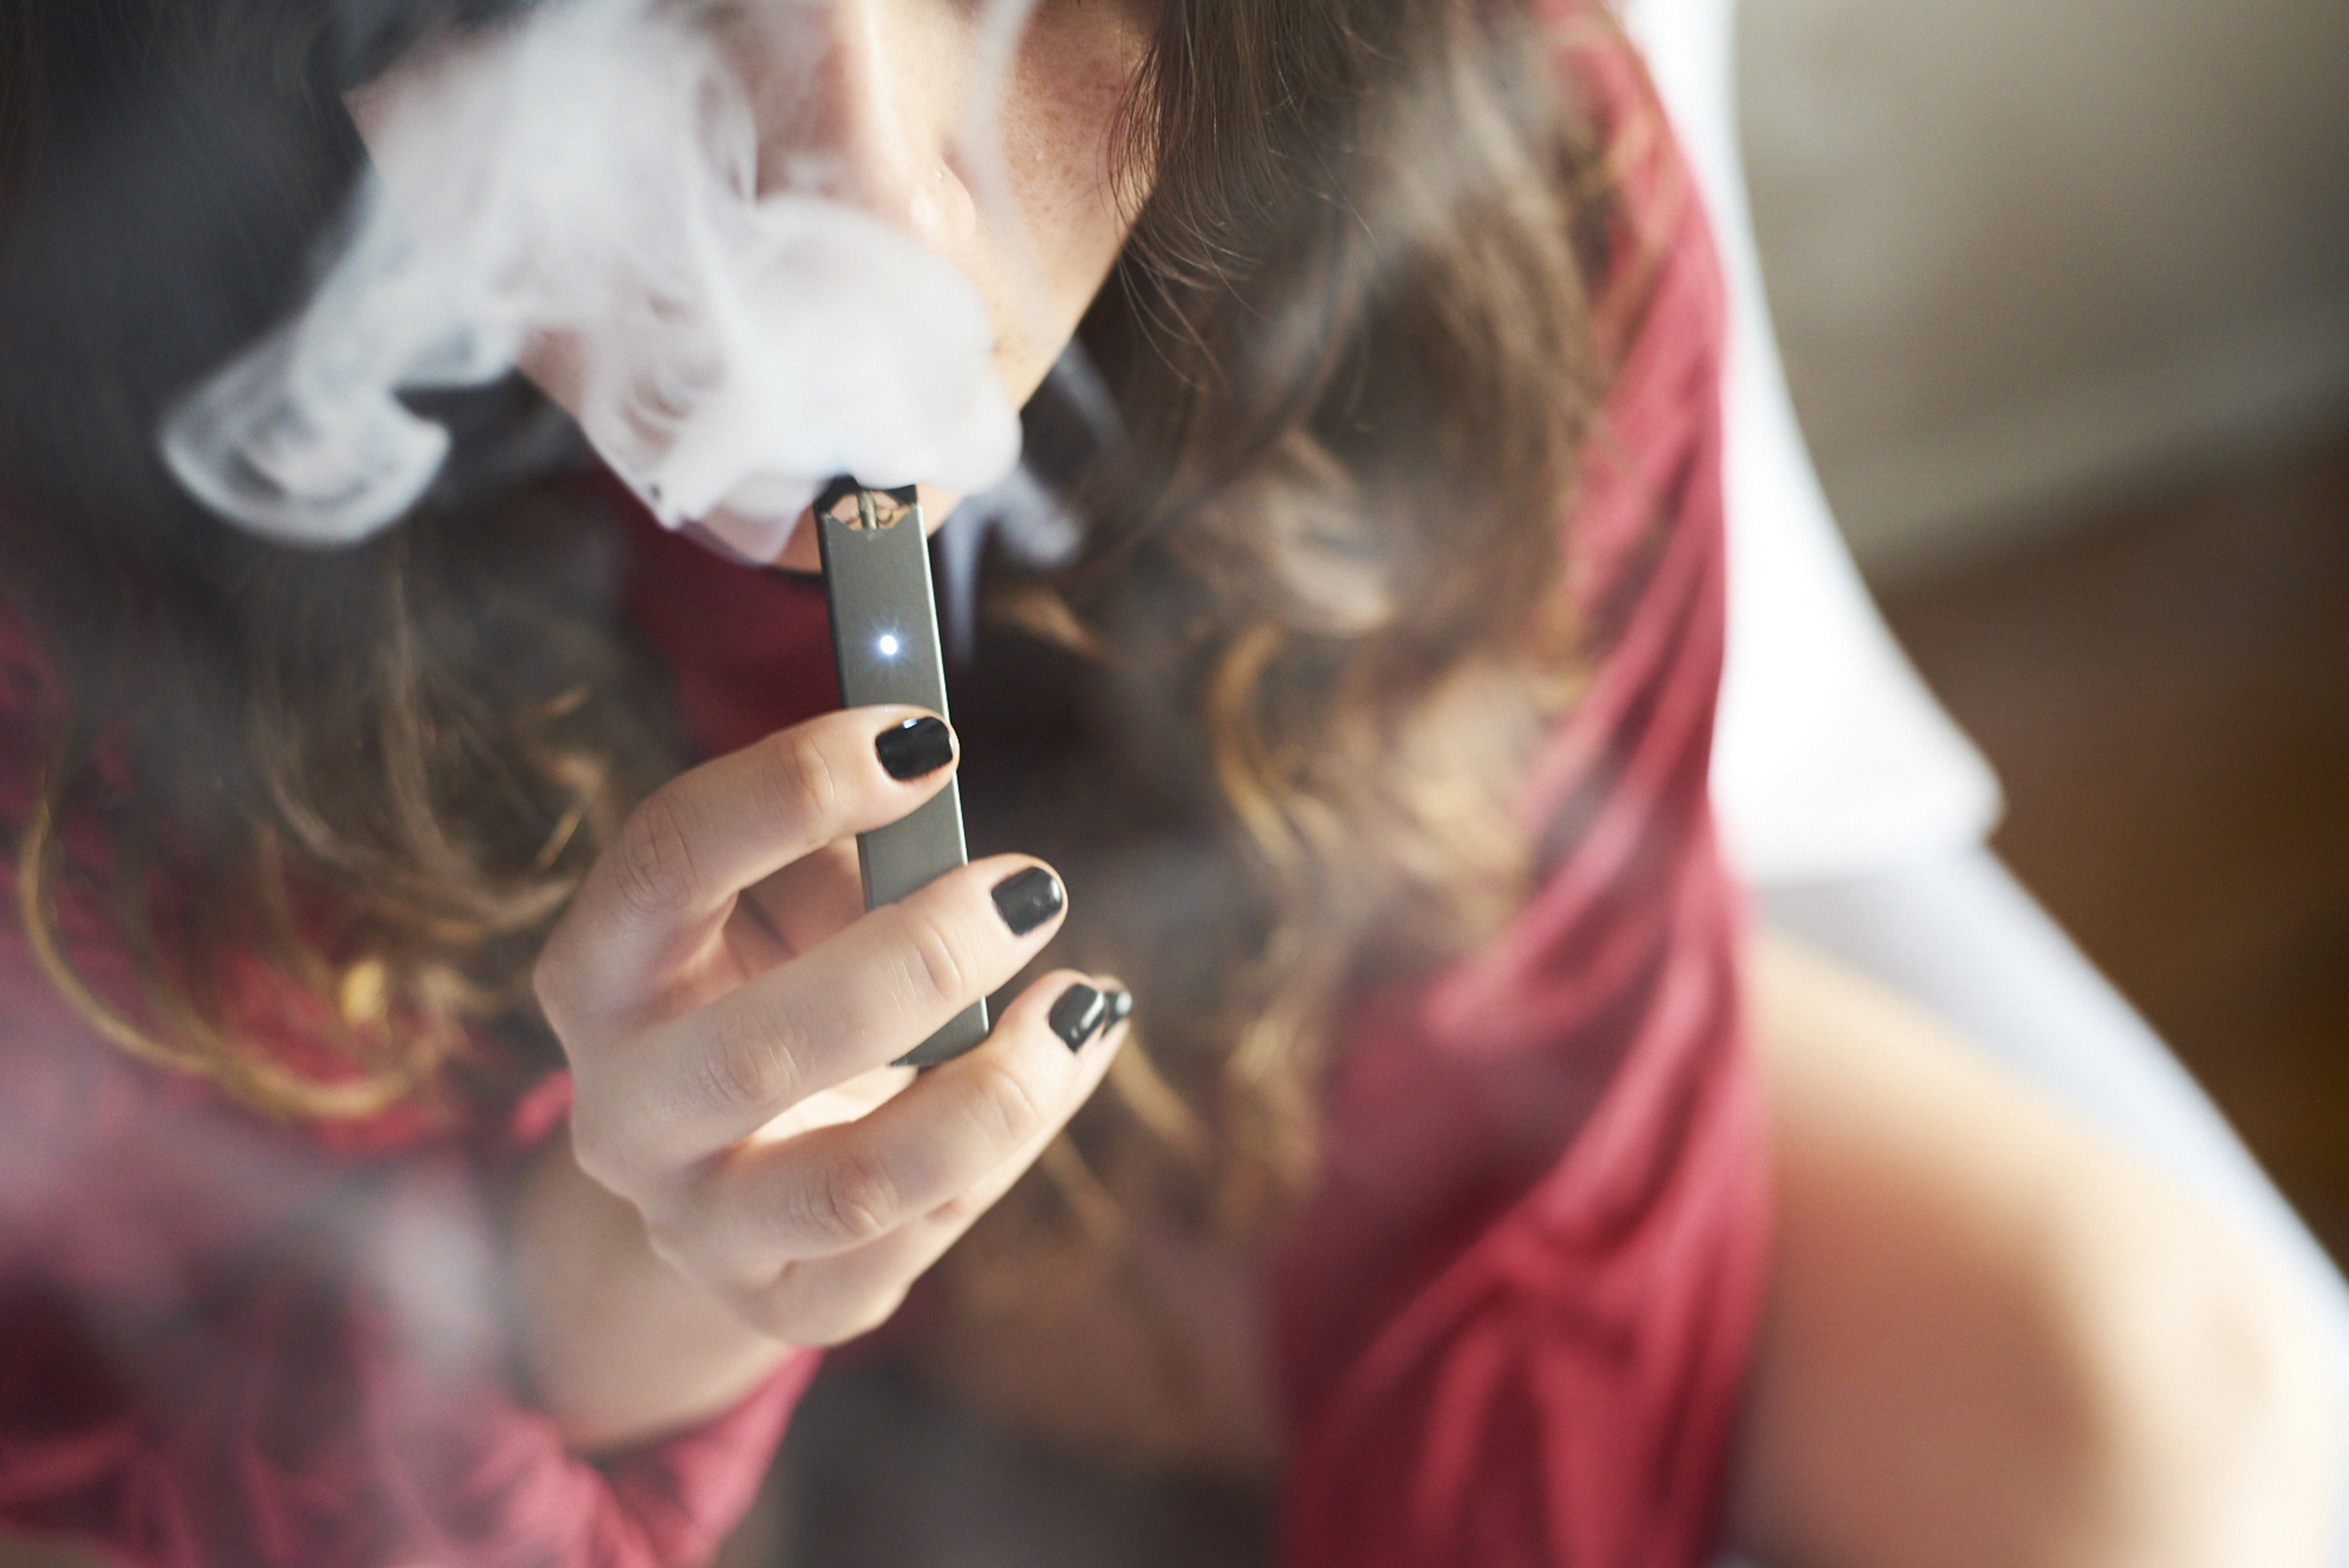 Youth Smoking and Vaping: A Troubling Report on Regulatory Failures